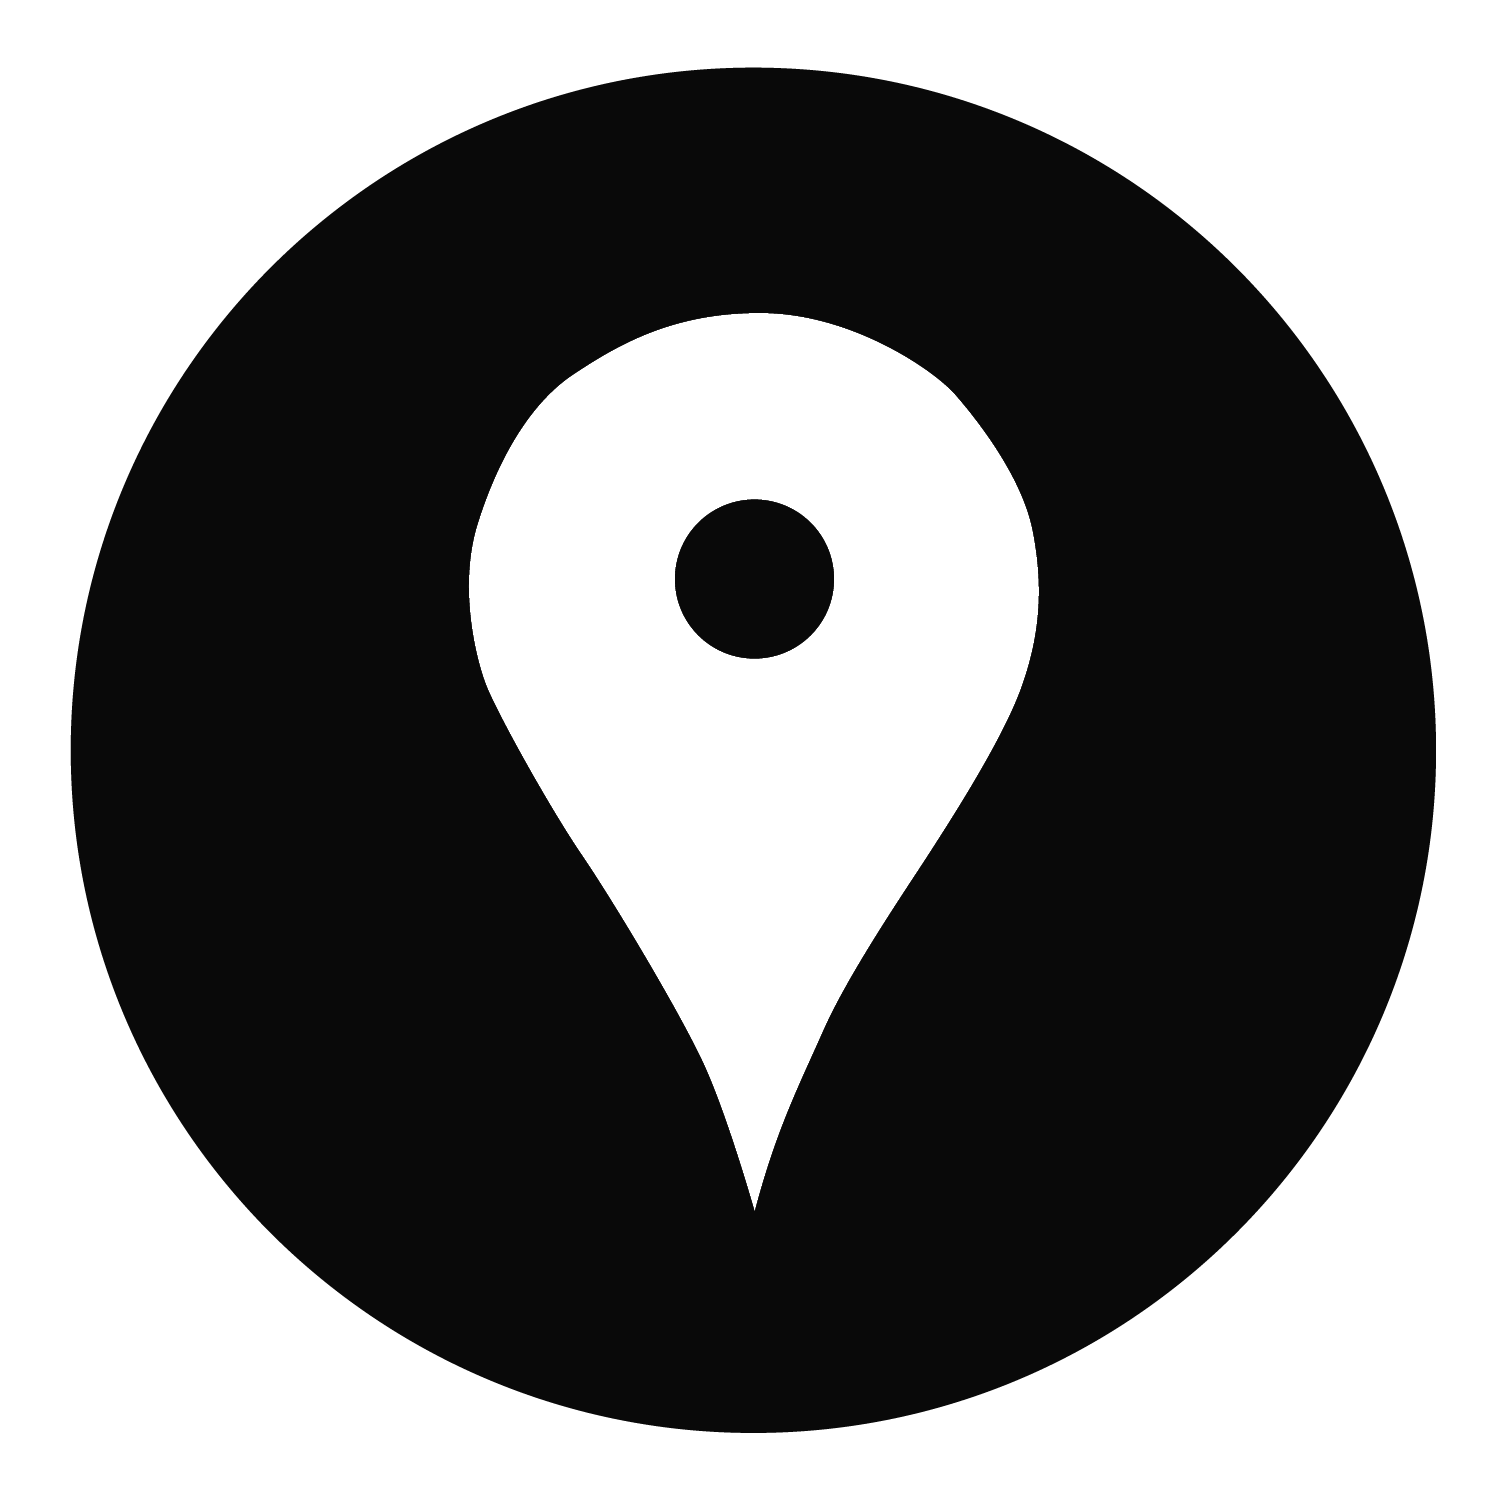 Map icon | Myiconfinder